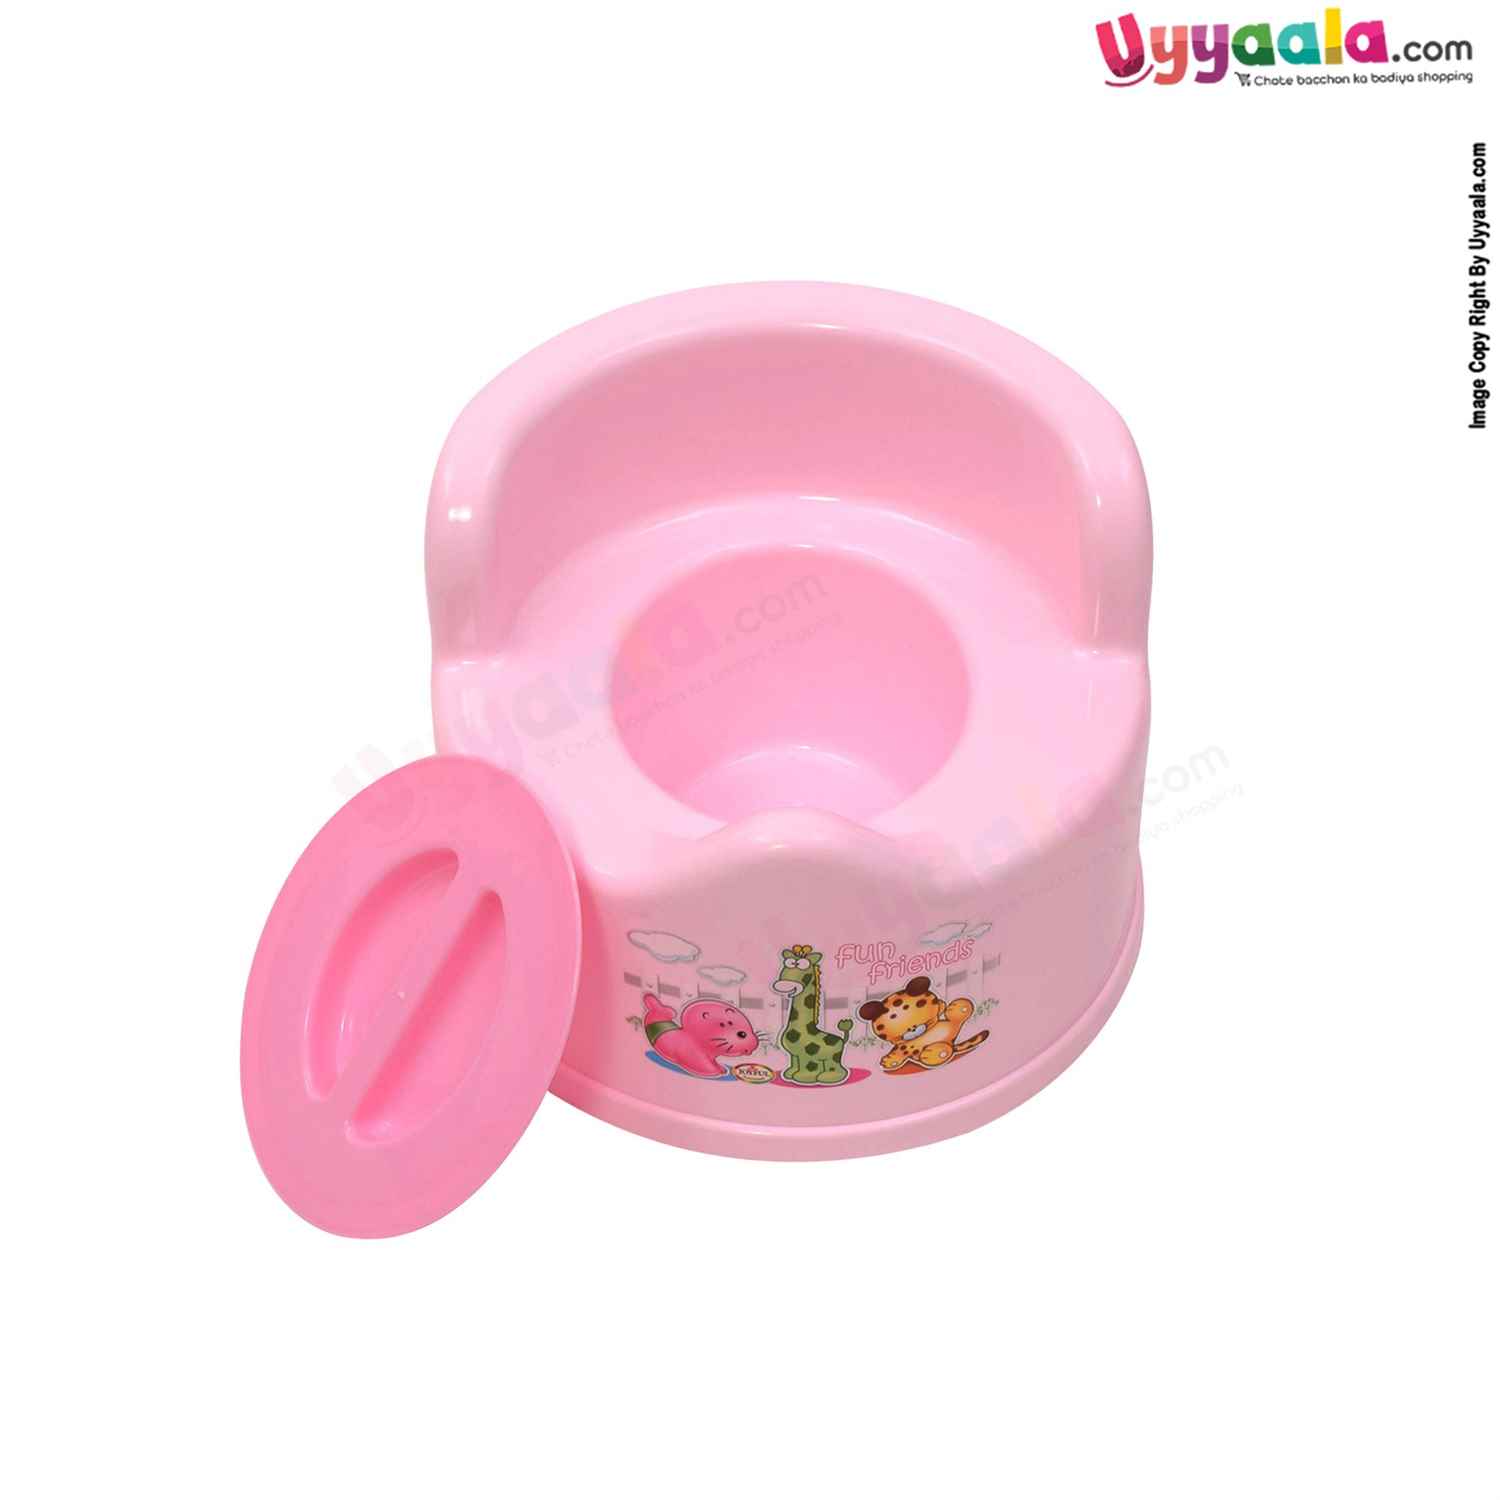 JOYFUL Baby Potty Training Seat with Lid for 5+m Age - Pink